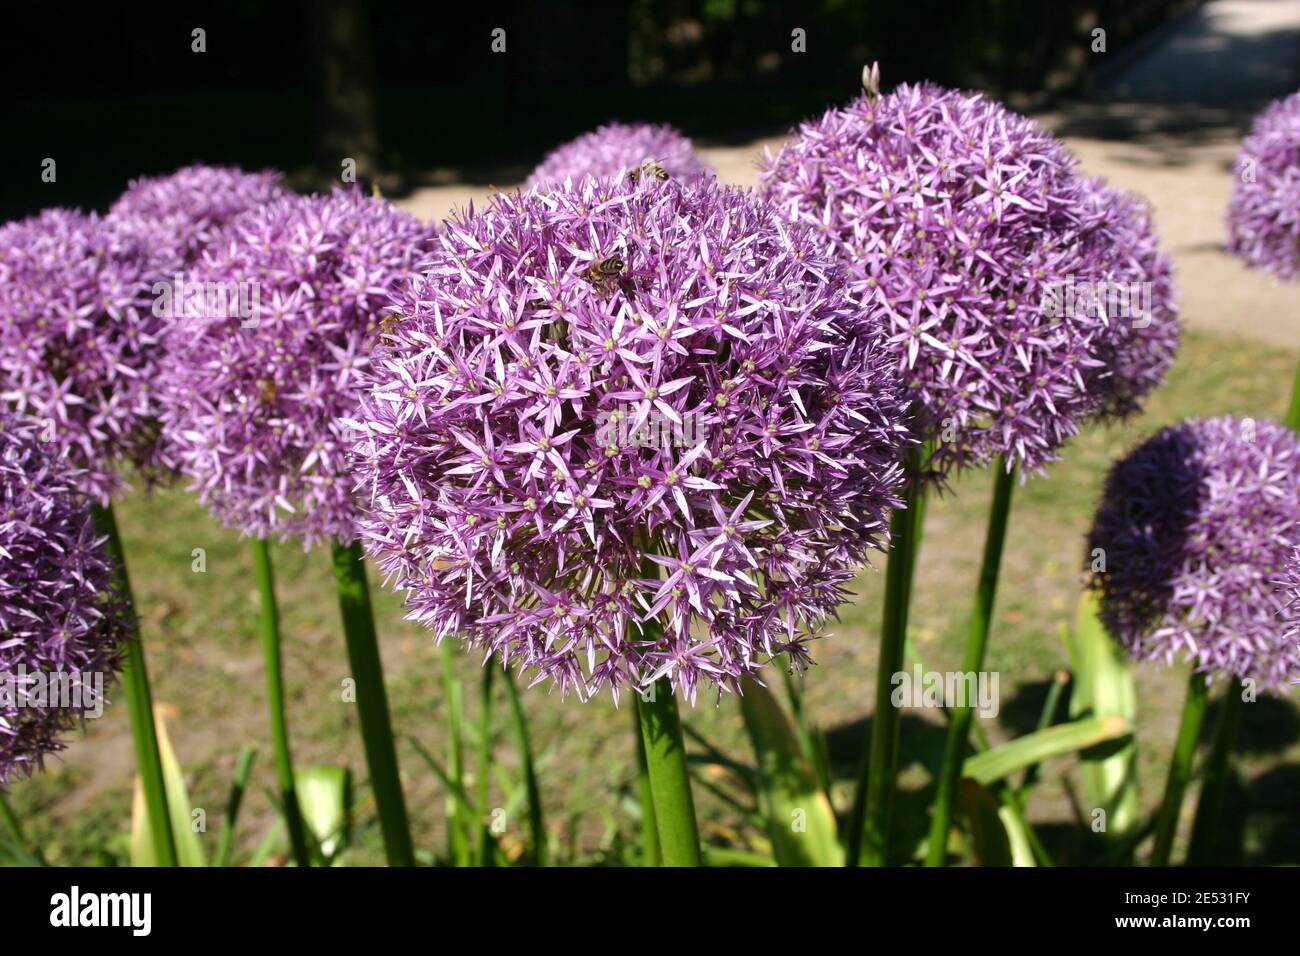 CLOSE UP OF GIANT ORNAMENTAL ONION (ALLIUM) FLOWERSAN ASIAN SPECIES OF ONION NATIVE TO CENTRAL AND SOUTHWESTERN ASIA. Stock Photo